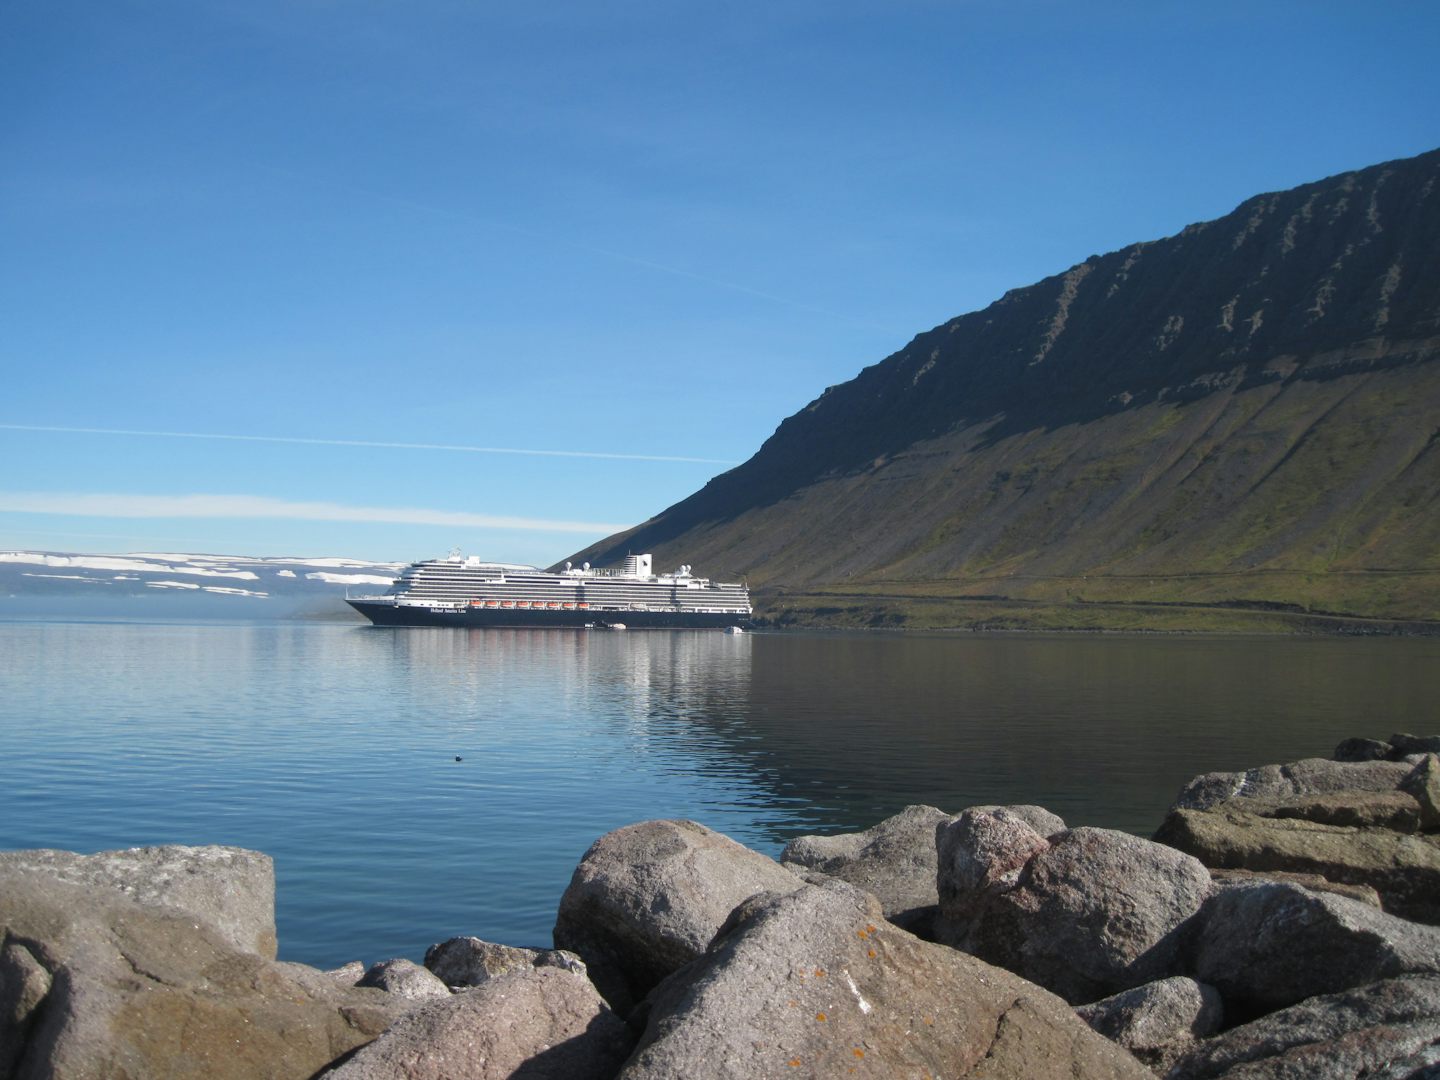 When we arrived at Isafjordur, Iceland on the Koningsdam, the fog was thick. Then, magically, it melted away to show us the gorgeous bowl of treeless green hills that formed the harbour.